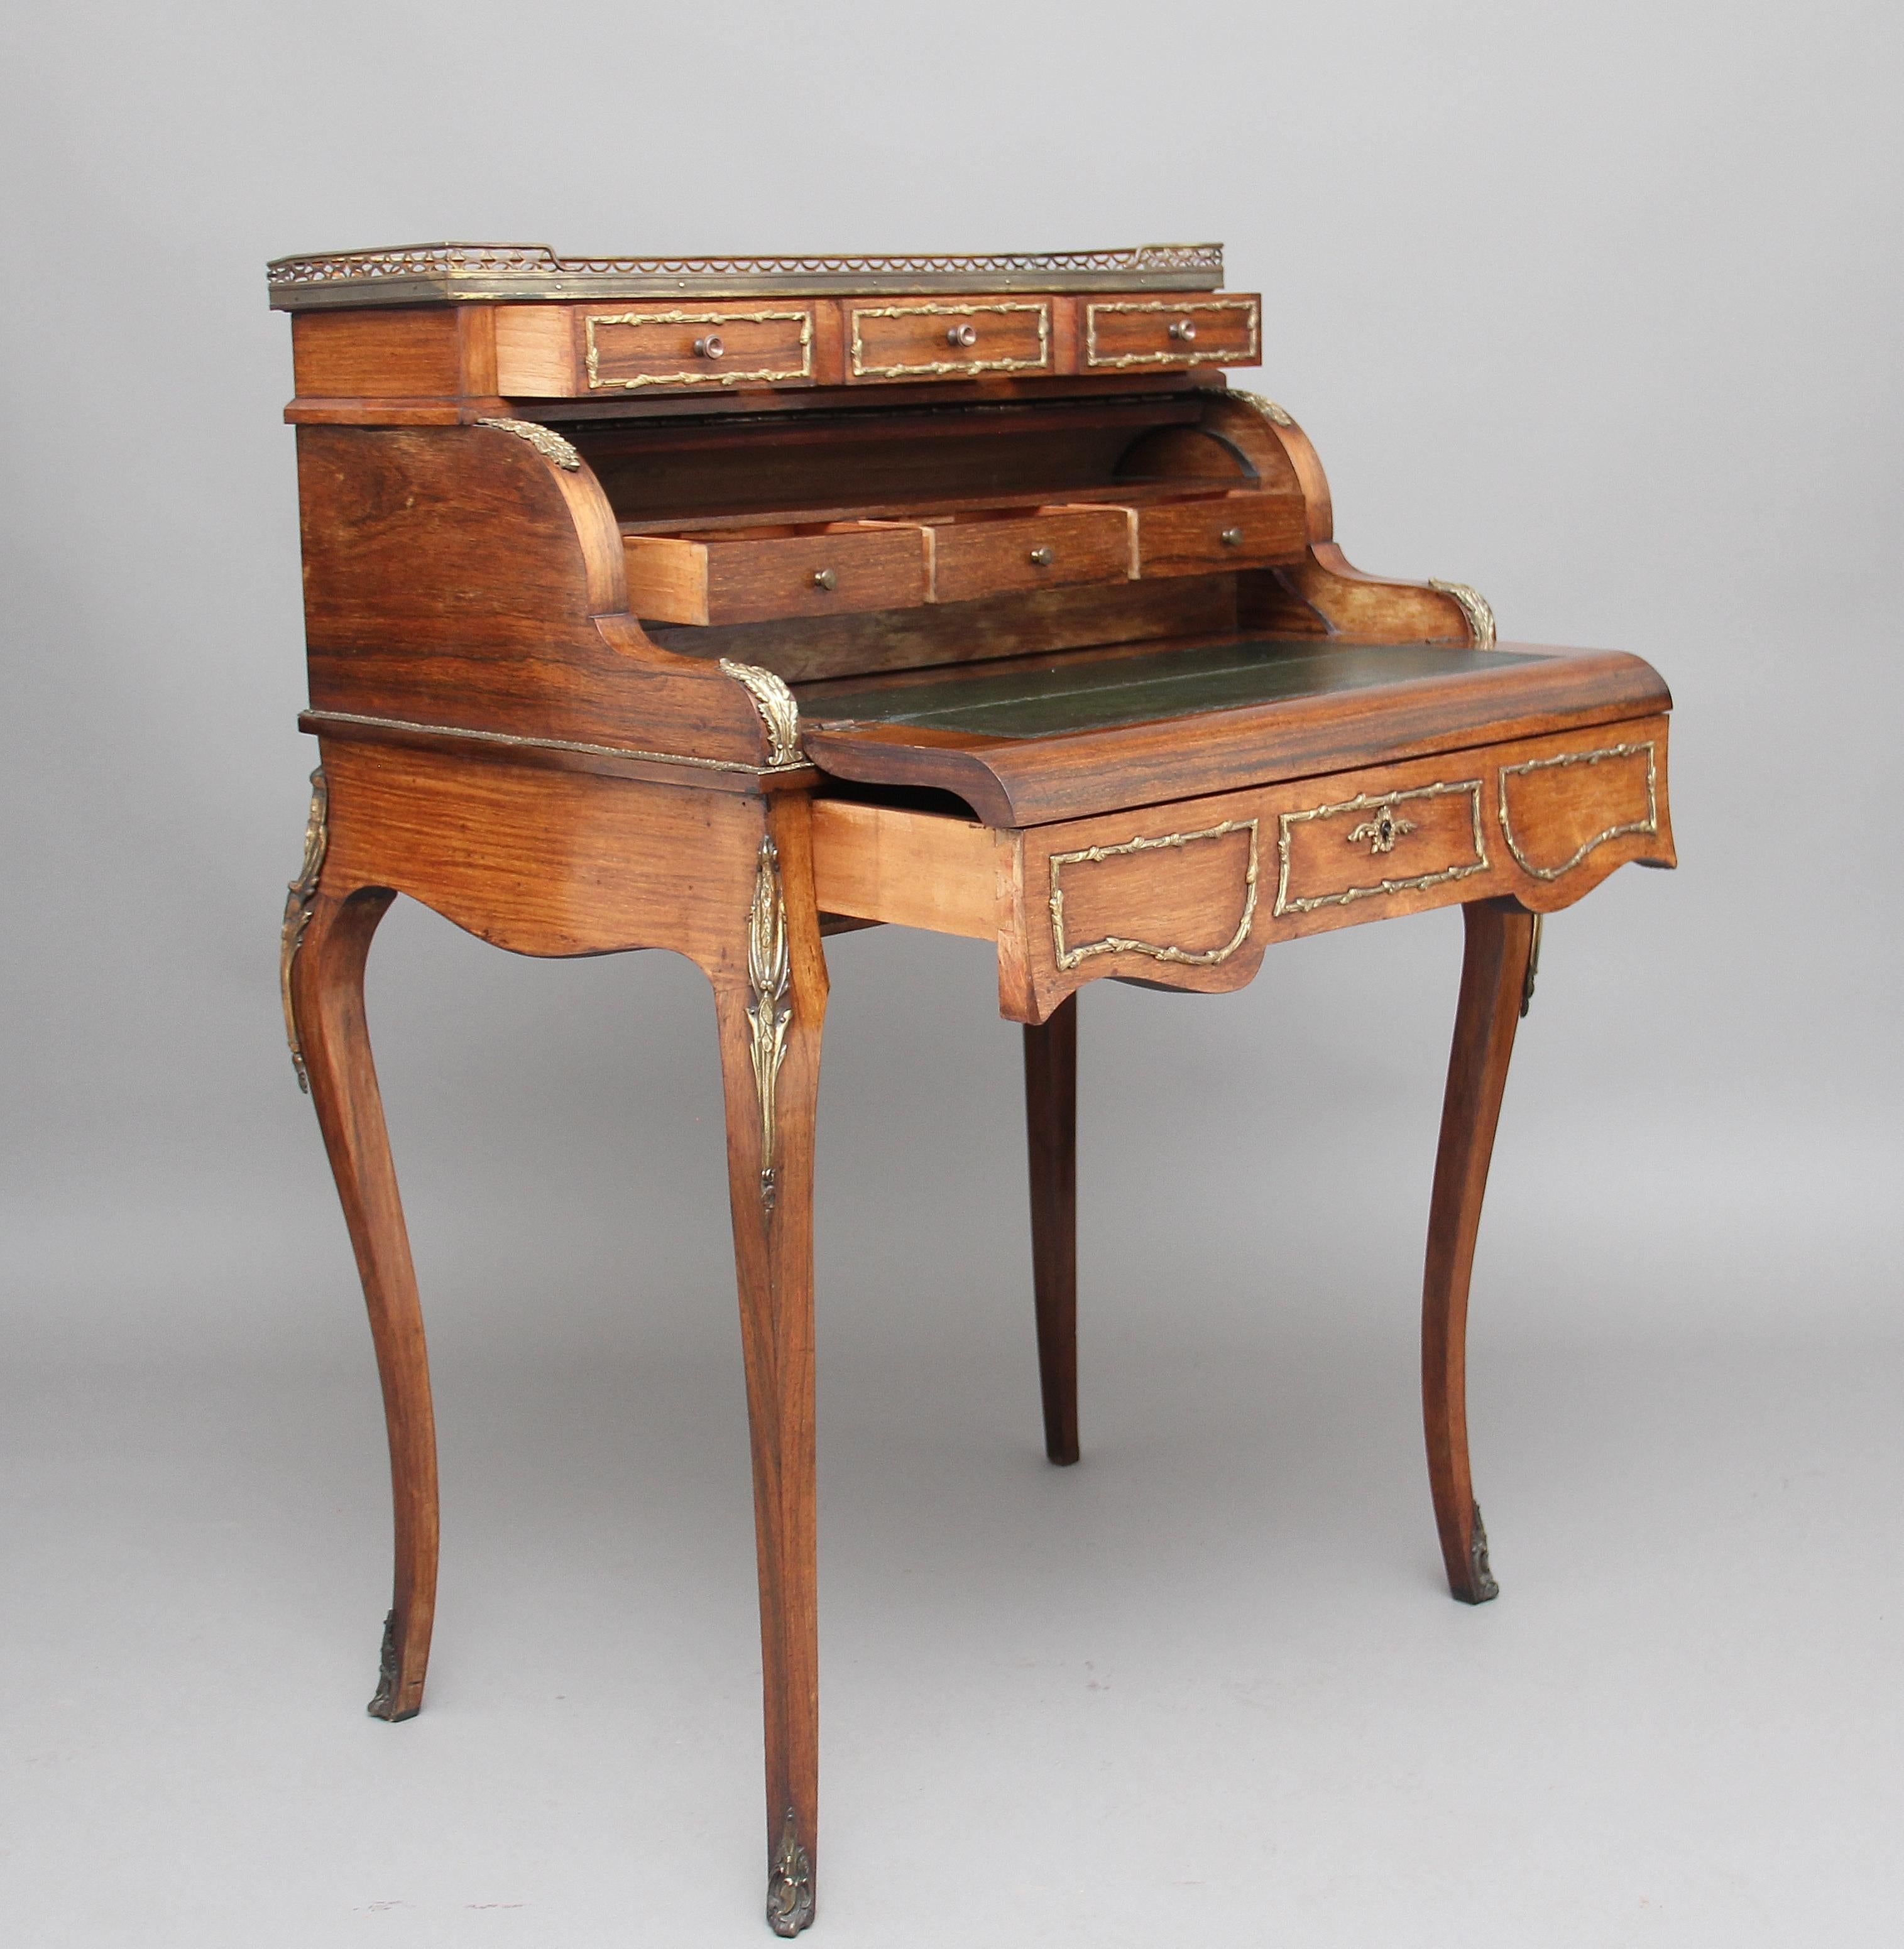 19th century French rosewood and ormolu cylinder bureau on four cabriole legs, with one long drawer which when you open it the cylinder opens and you flip the fall over which rests on the open drawer to reveal a green leather writing surface and